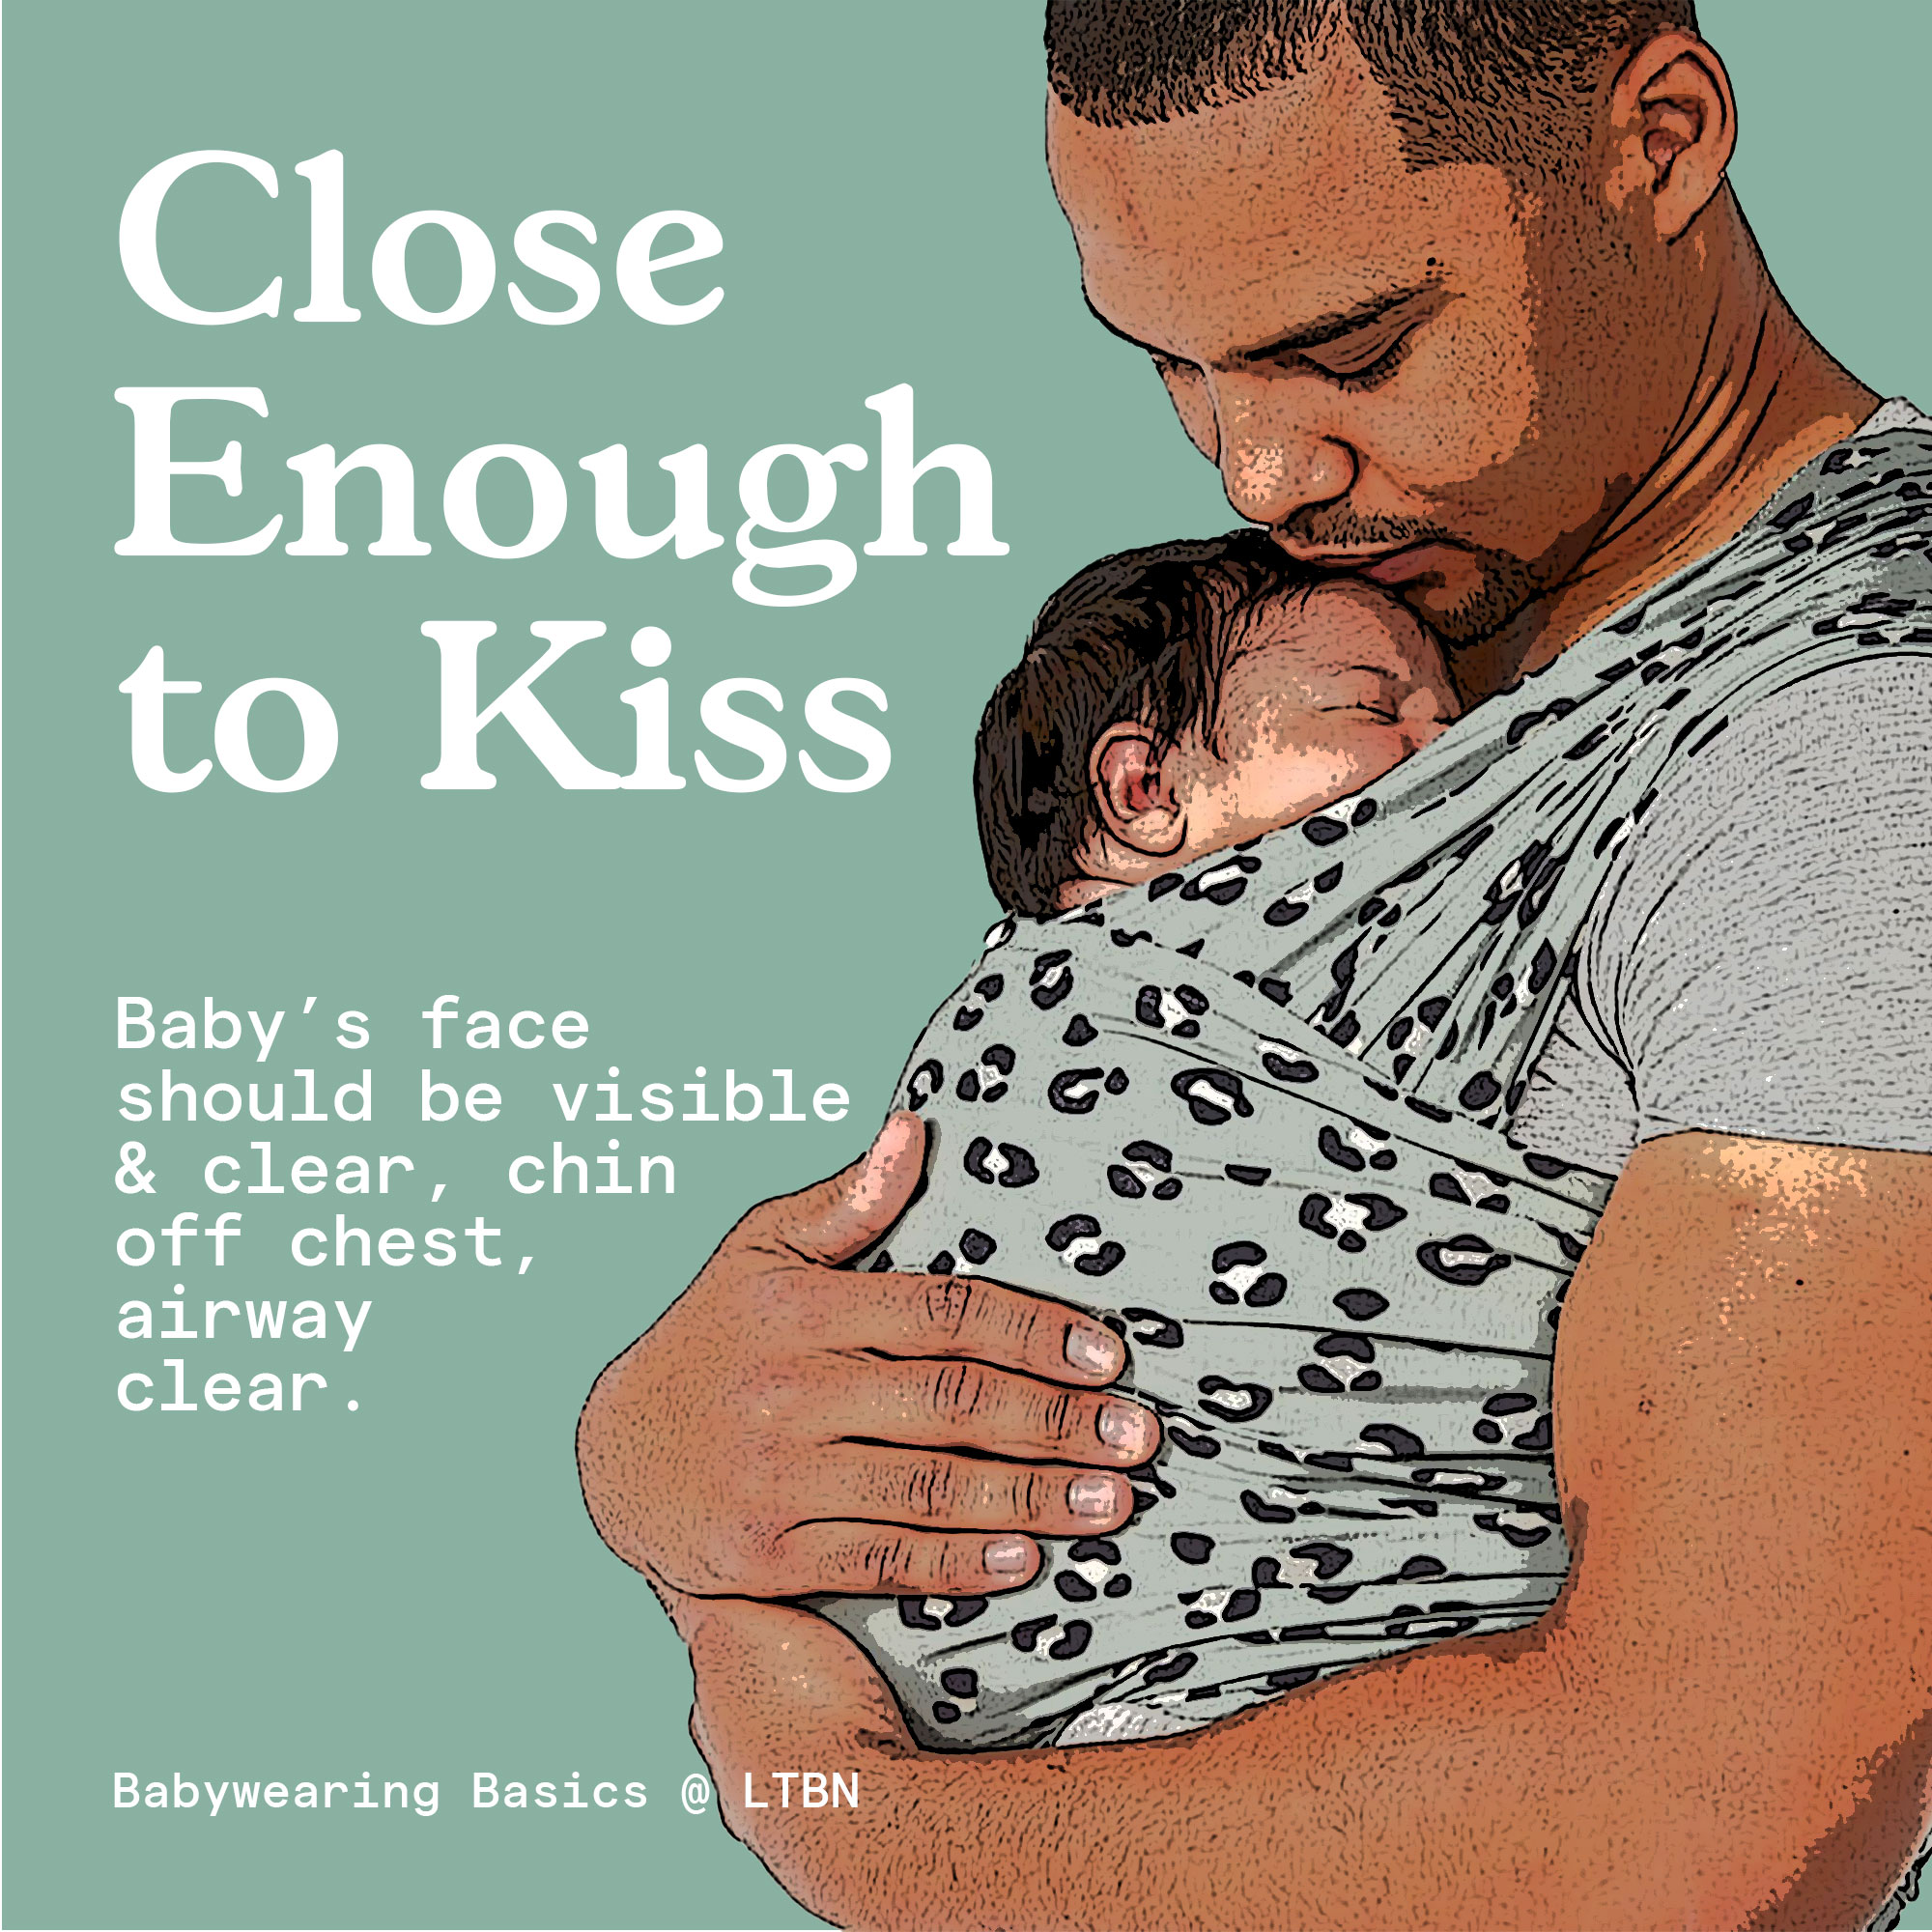 Close enough to kiss infographic